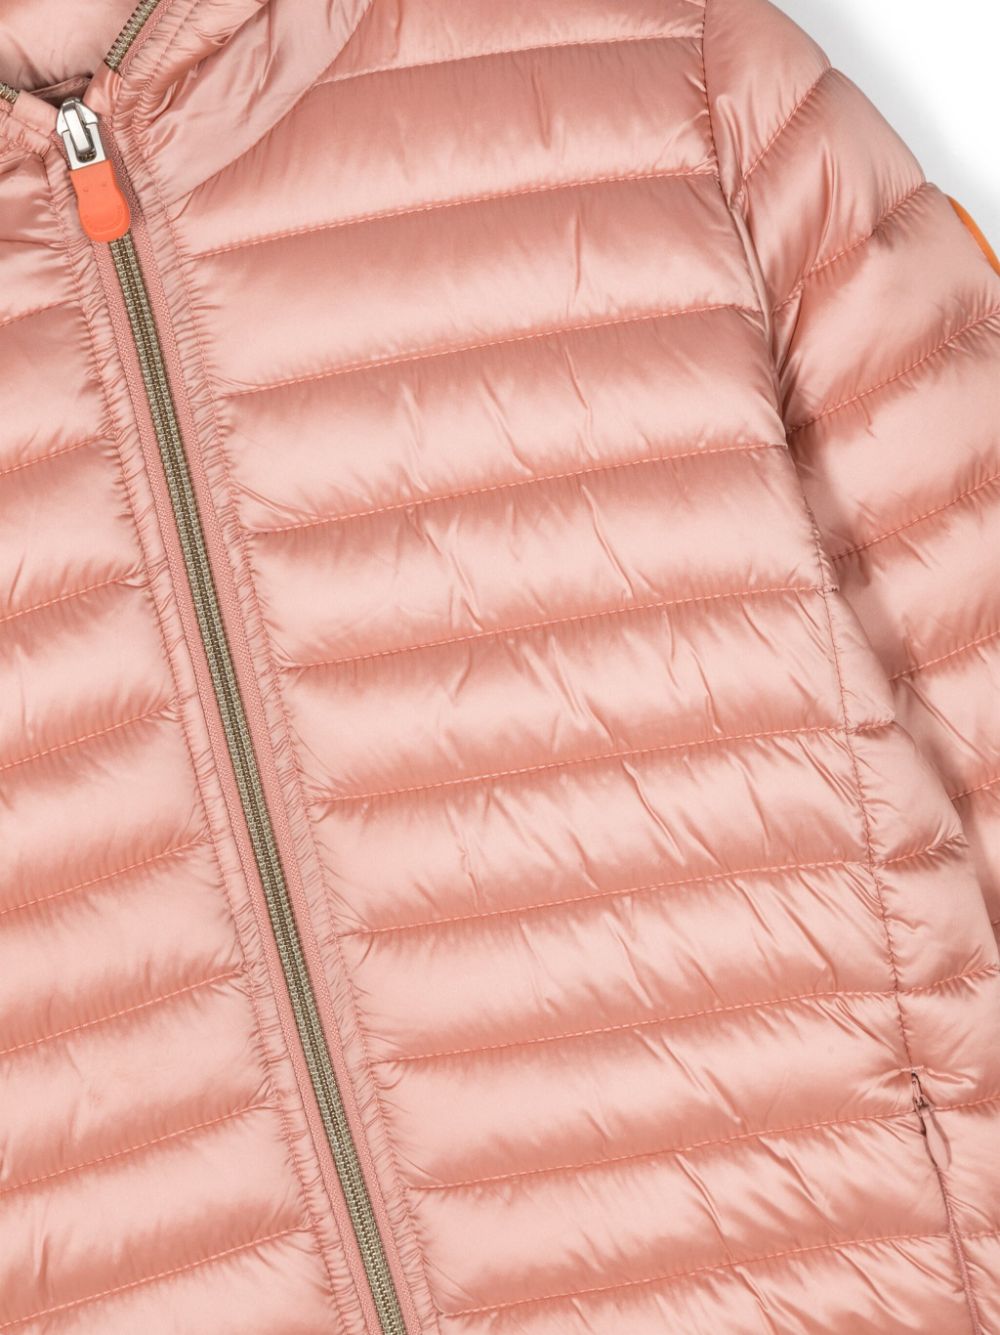 Pink padded jacket for girls